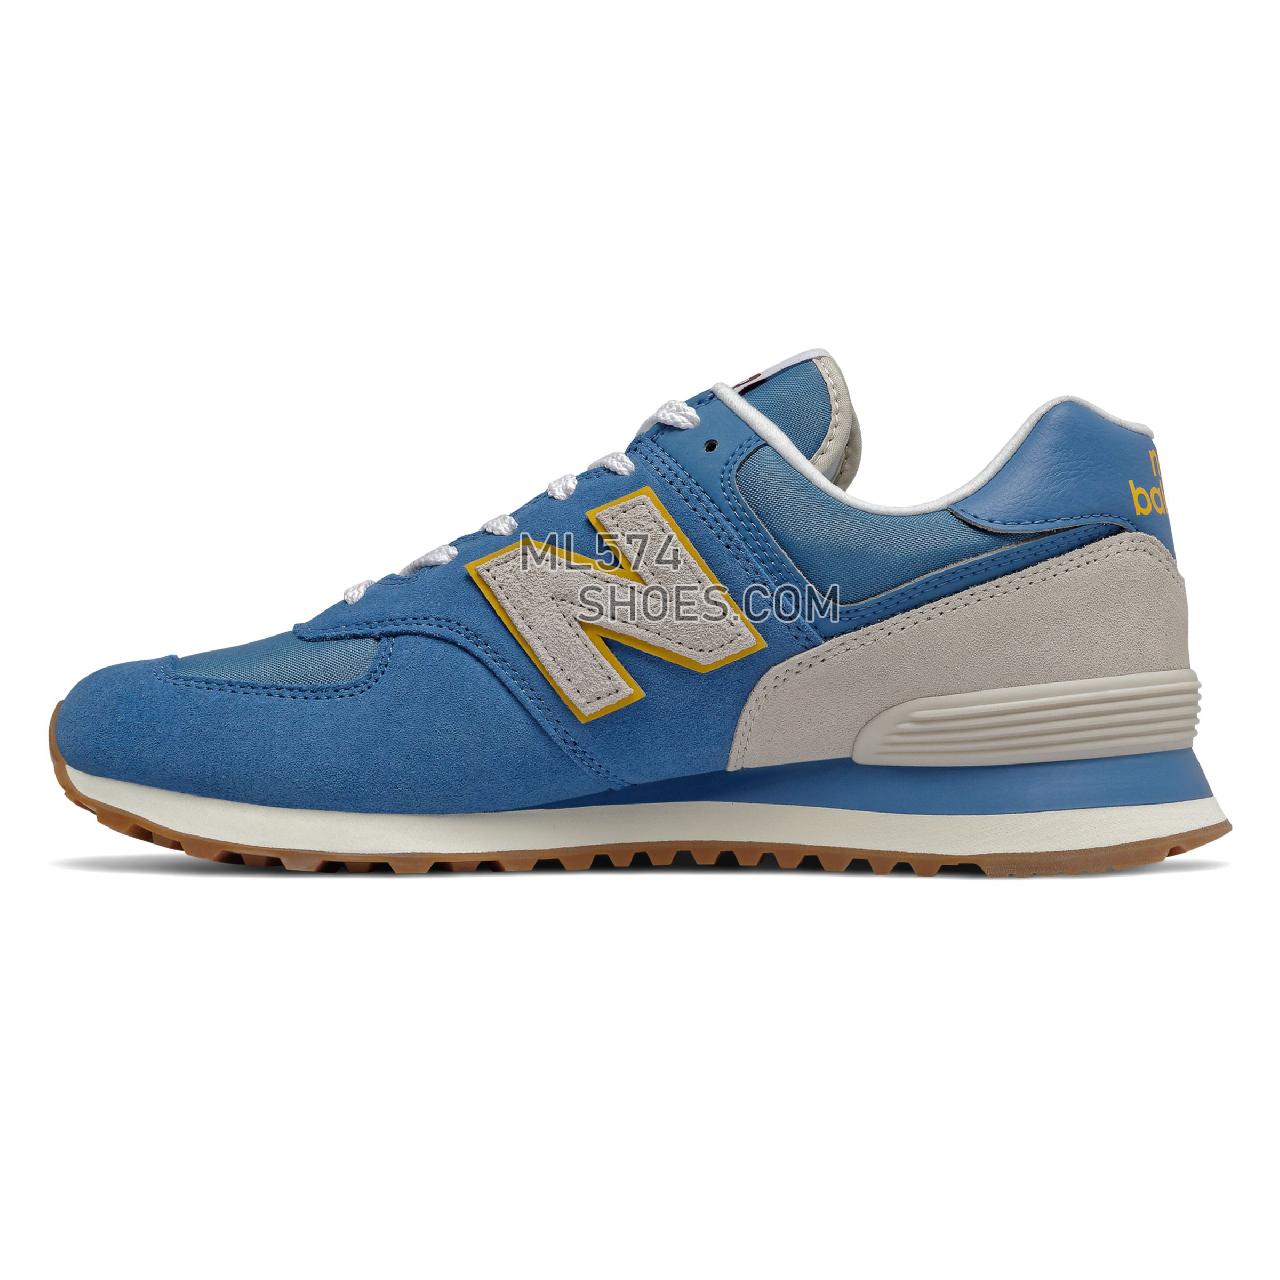 New Balance 574v2 - Men's Classic Sneakers - Mako Blue with Chromatic Yellow - ML574SCA